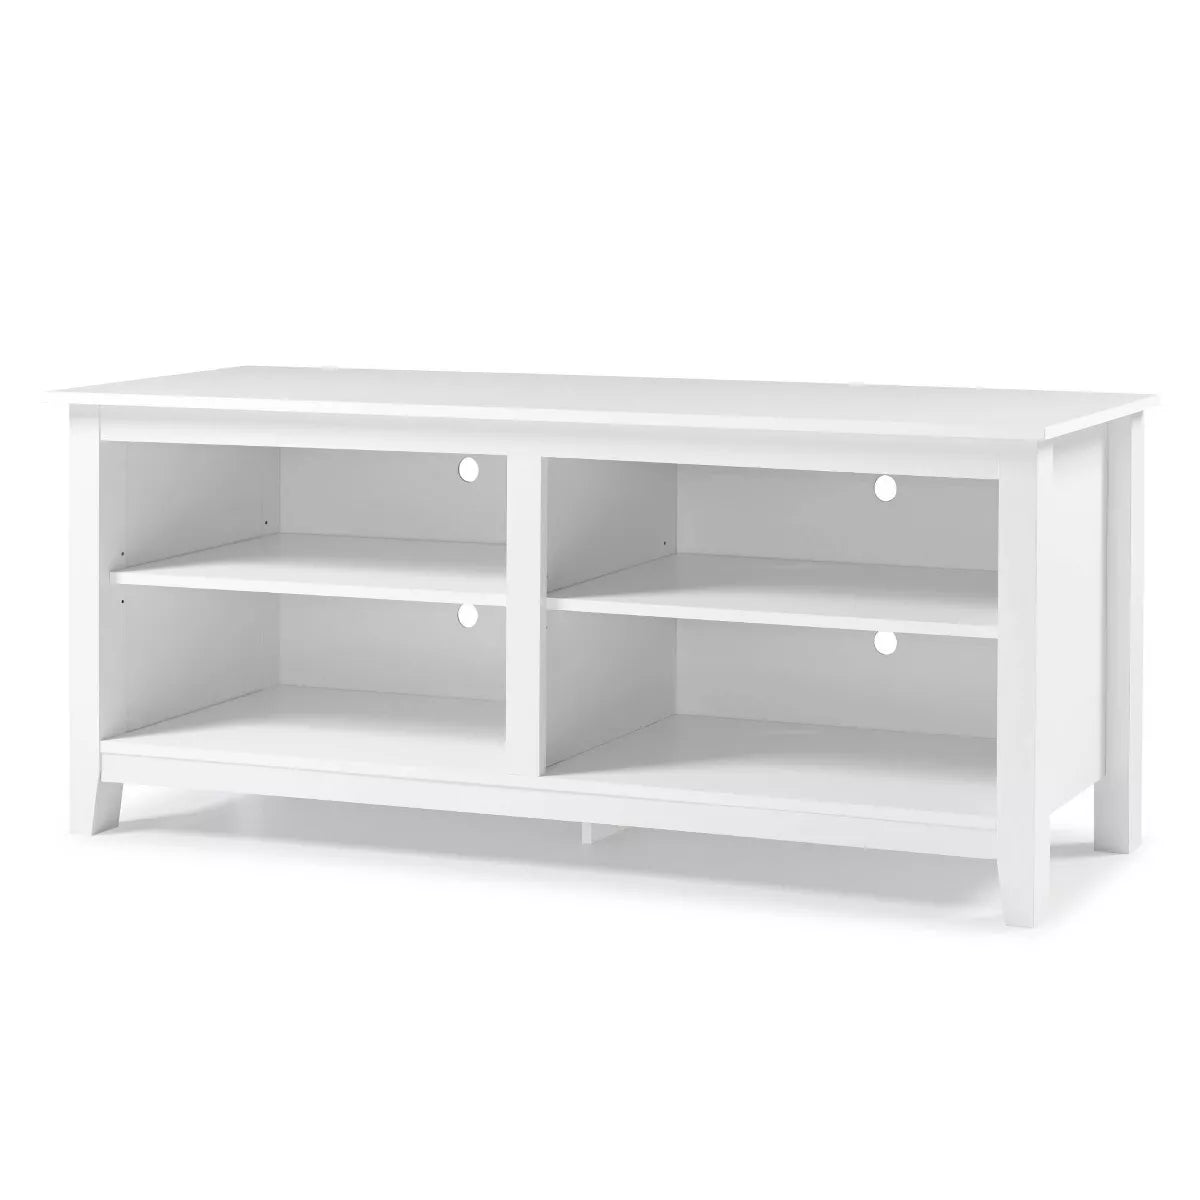 Transitional 4 Cubby Wood Open Storage TV Stand for TVs up to 65" Gray Wash - Saracina Home